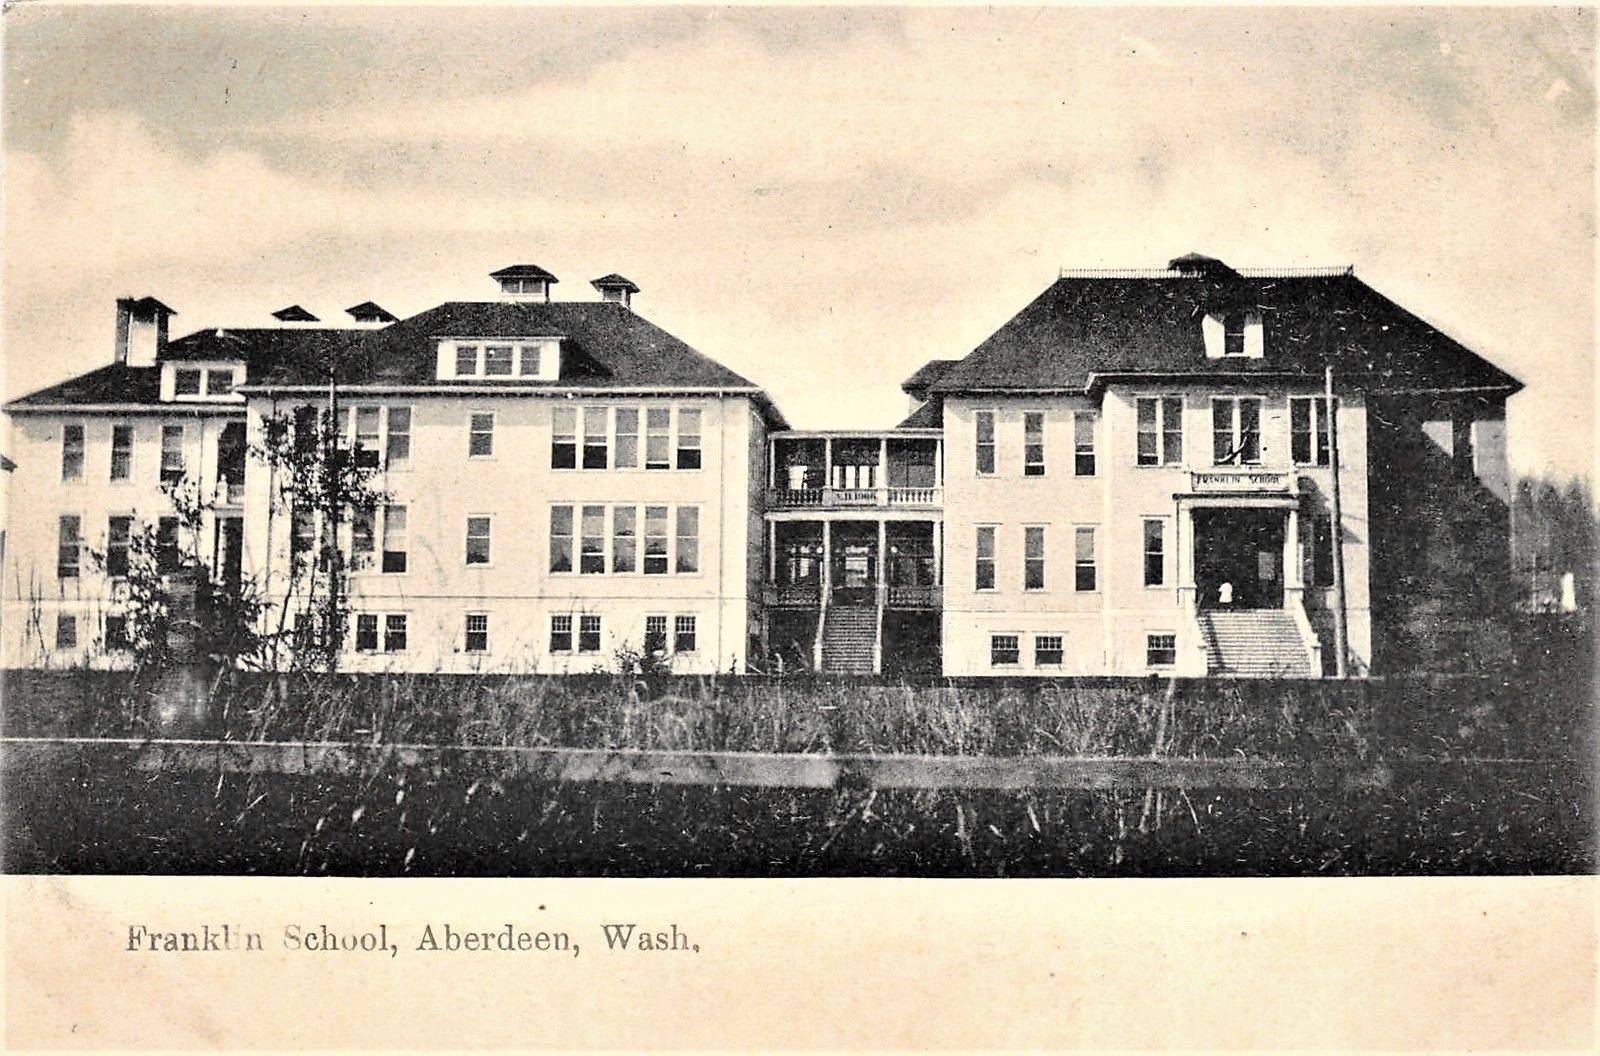 Roy Vataja Collection
The first location of Grays Harbor Junior College was in the former Franklin Elementary School from 1930-35.